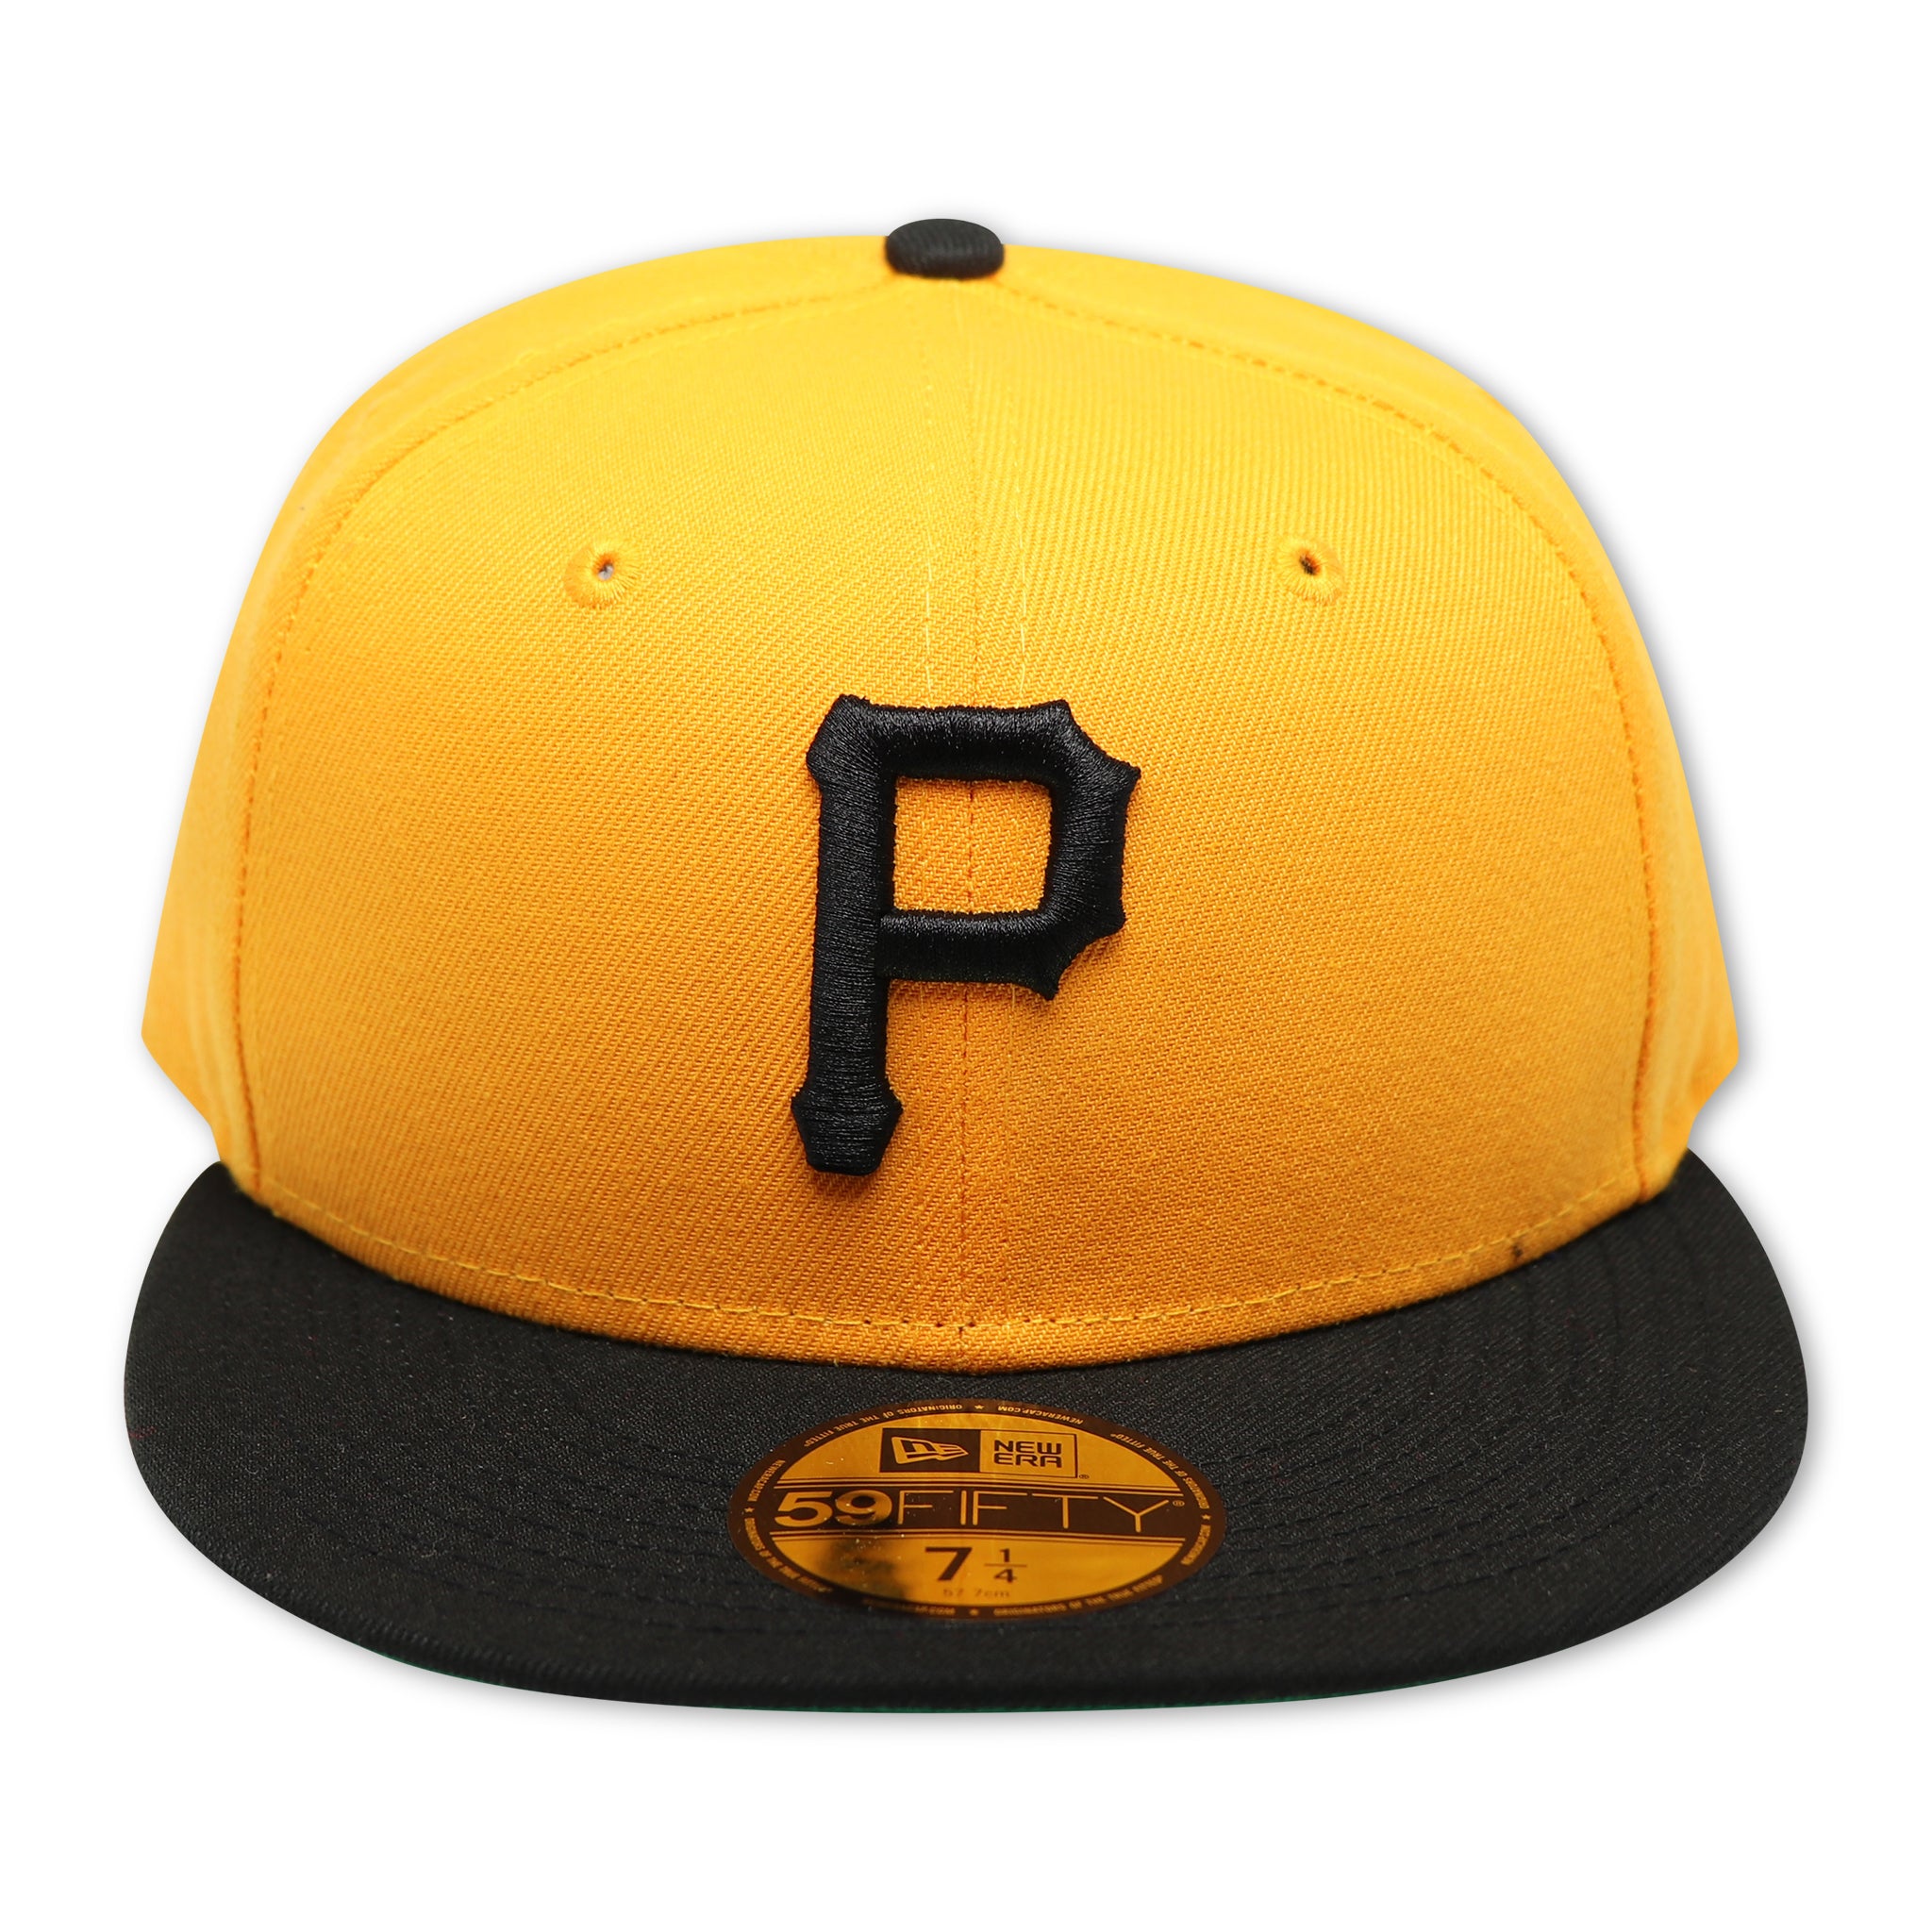 PITTSBURG PIRATES (1971-1975 GAME) 59FIFTY FITTED (GREEN UNDER VISOR)